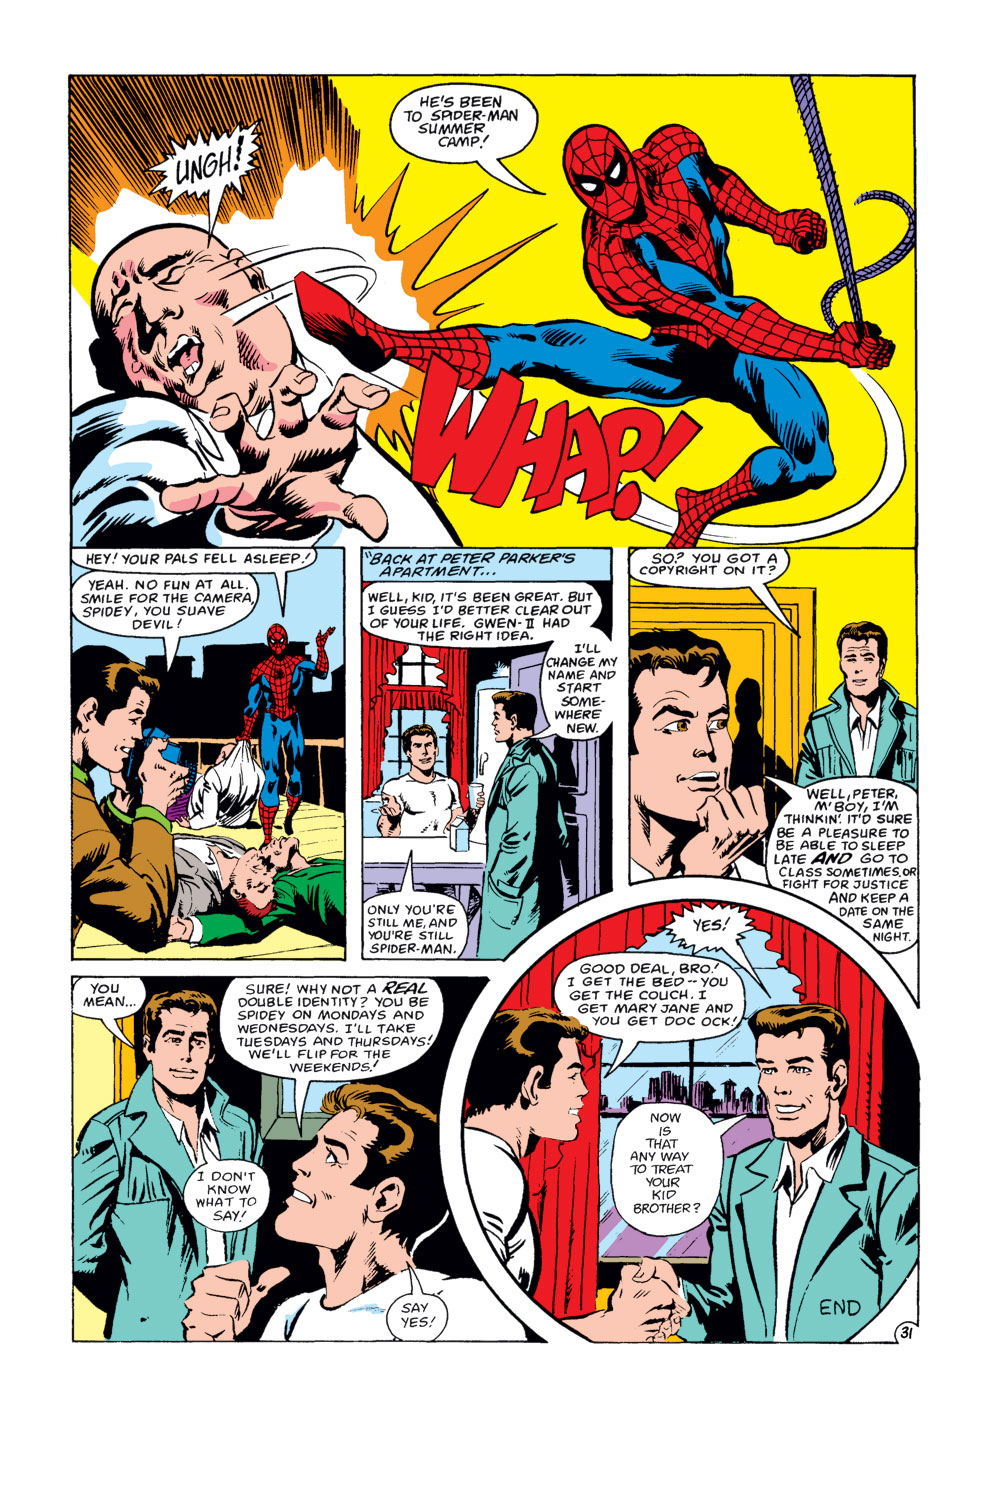 What If? (1977) issue 30 - Spider-Man's clone lived - Page 32